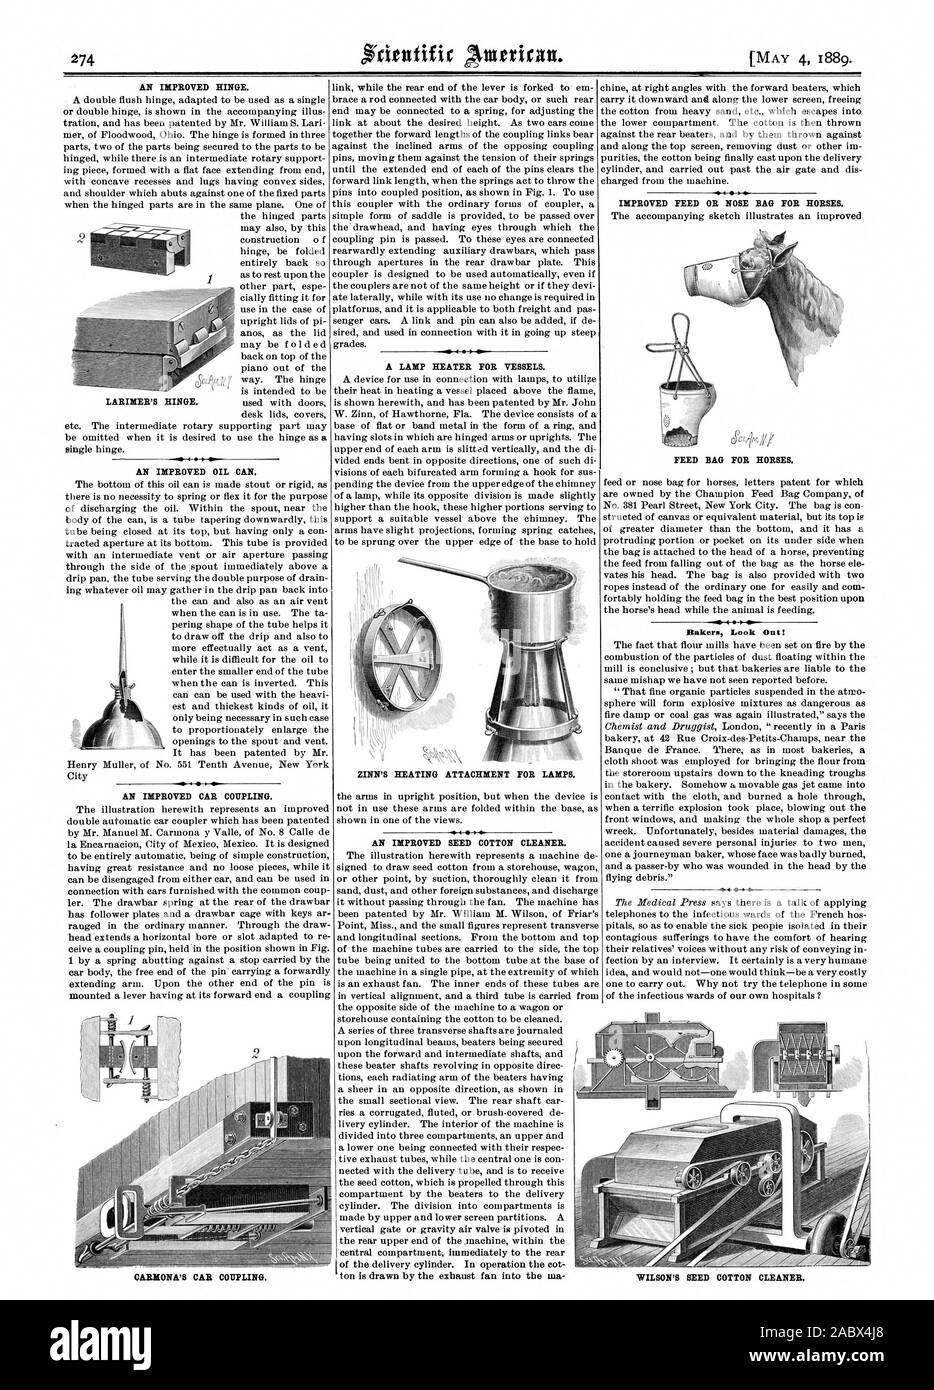 A LAMP HEATER FOR VESSELS. ZINN'S HEATING ATTACHMENT FOR LAMPS. AN IMPROVED SEED COTTON CLEANER. AN IMPROVED HINGE. AN IMPROVED OIL CAN. AN IMPROVED CAR COUPLING. CAR1LONA'S CAR COUPLING. Bakers Look Oat! Q5CIAPI.k LARIMER'S HINGE. IMPROVED FEED OR NOSE BAG FOR HORSES. FEED BAG FOR HORSES. WILSON'S SEED COTTON CLEANER., scientific american, 1889-05-04 Stock Photo